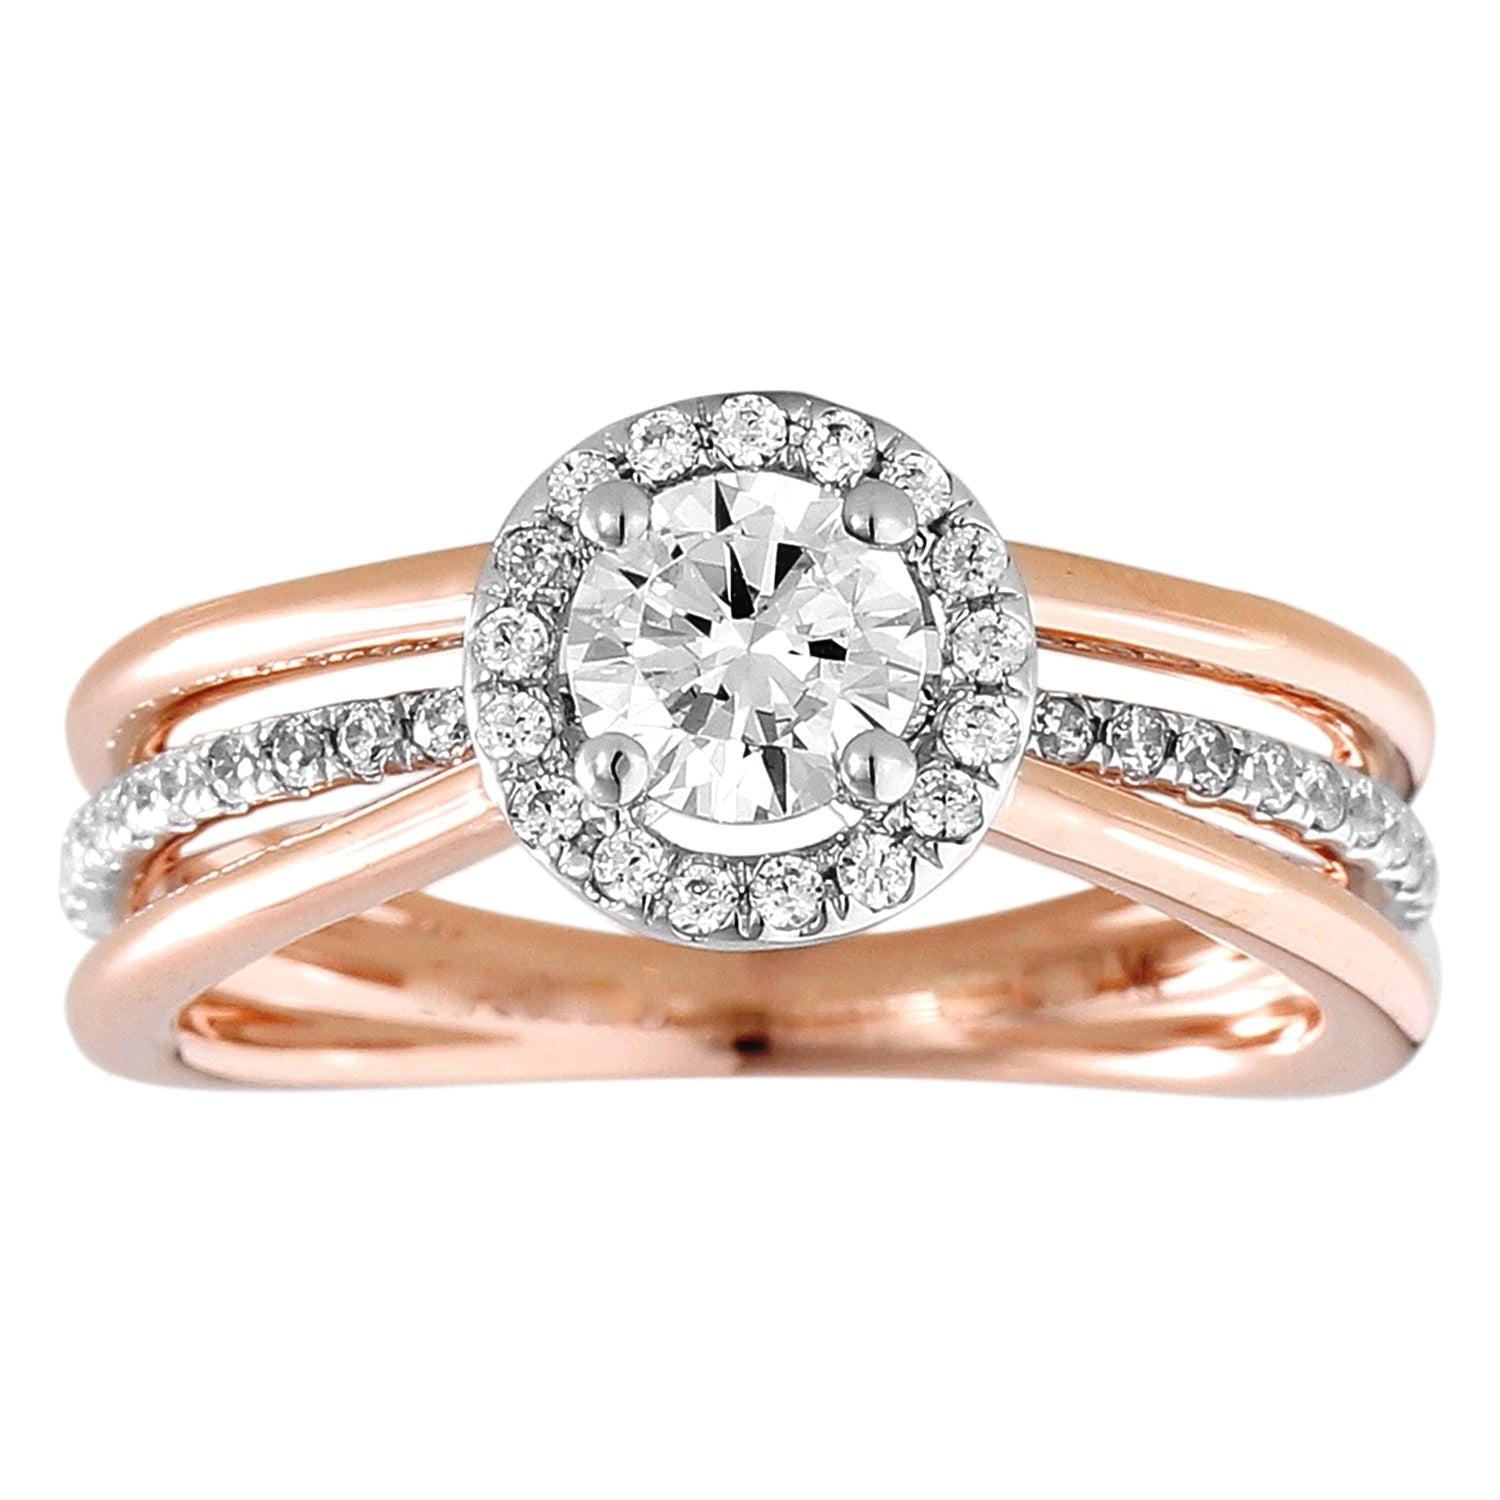 Embrace Diamond Engagement Ring made in 14k Rose gold